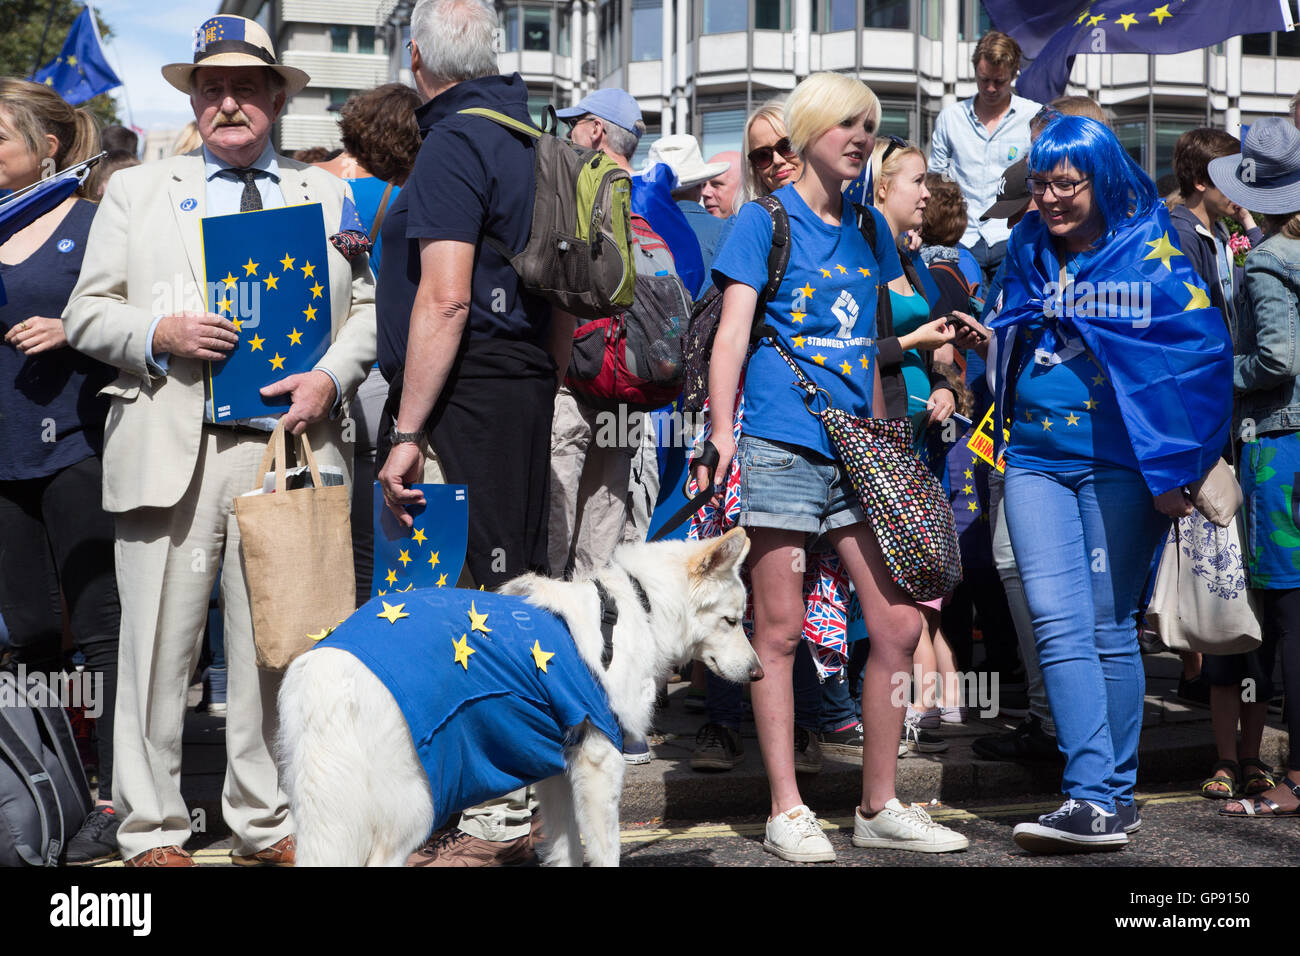 London, UK. 3rd September, 2016. thousands march in cities across the UK protesting against Brexit. London's demonstration marched to Parliament Square, two days before Parliament reconvenes to debate Britain’s future with Europe. Comedian Eddie Izzard was among the speakers. Credit:  On Sight Photographic/Alamy Live News Stock Photo